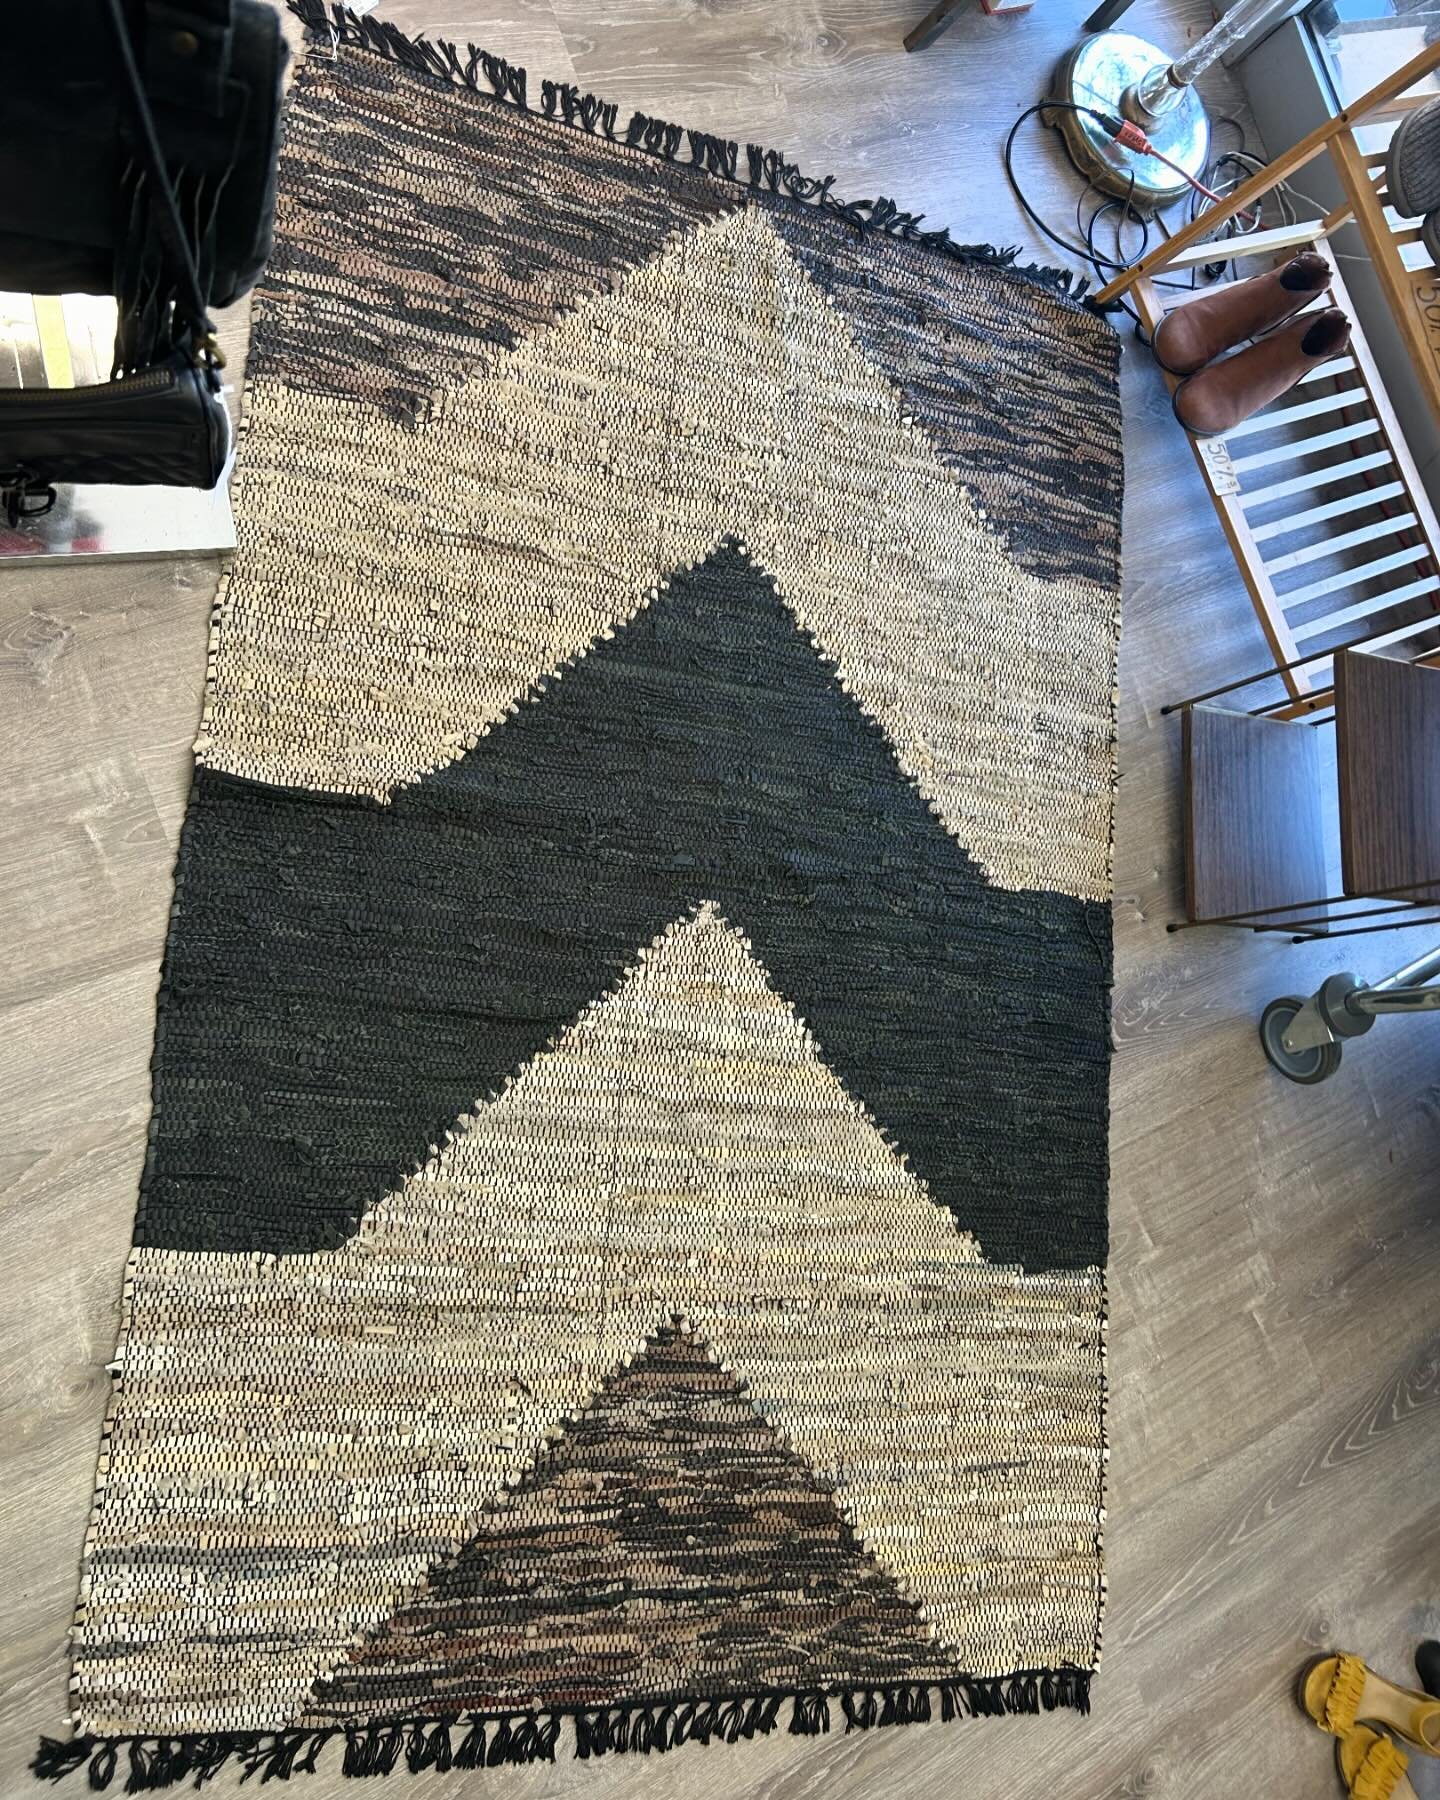 Rugs for sale! Check out our latest selection of woven rugs for your decor needs! 🏡

🏠 Urban Outfitters woven leather &amp; cotton blend large chevron print rug (4x6.25&rsquo;) - $75

🏠 World Market pink multi-color striped medium rug (2&rsquo;2.5